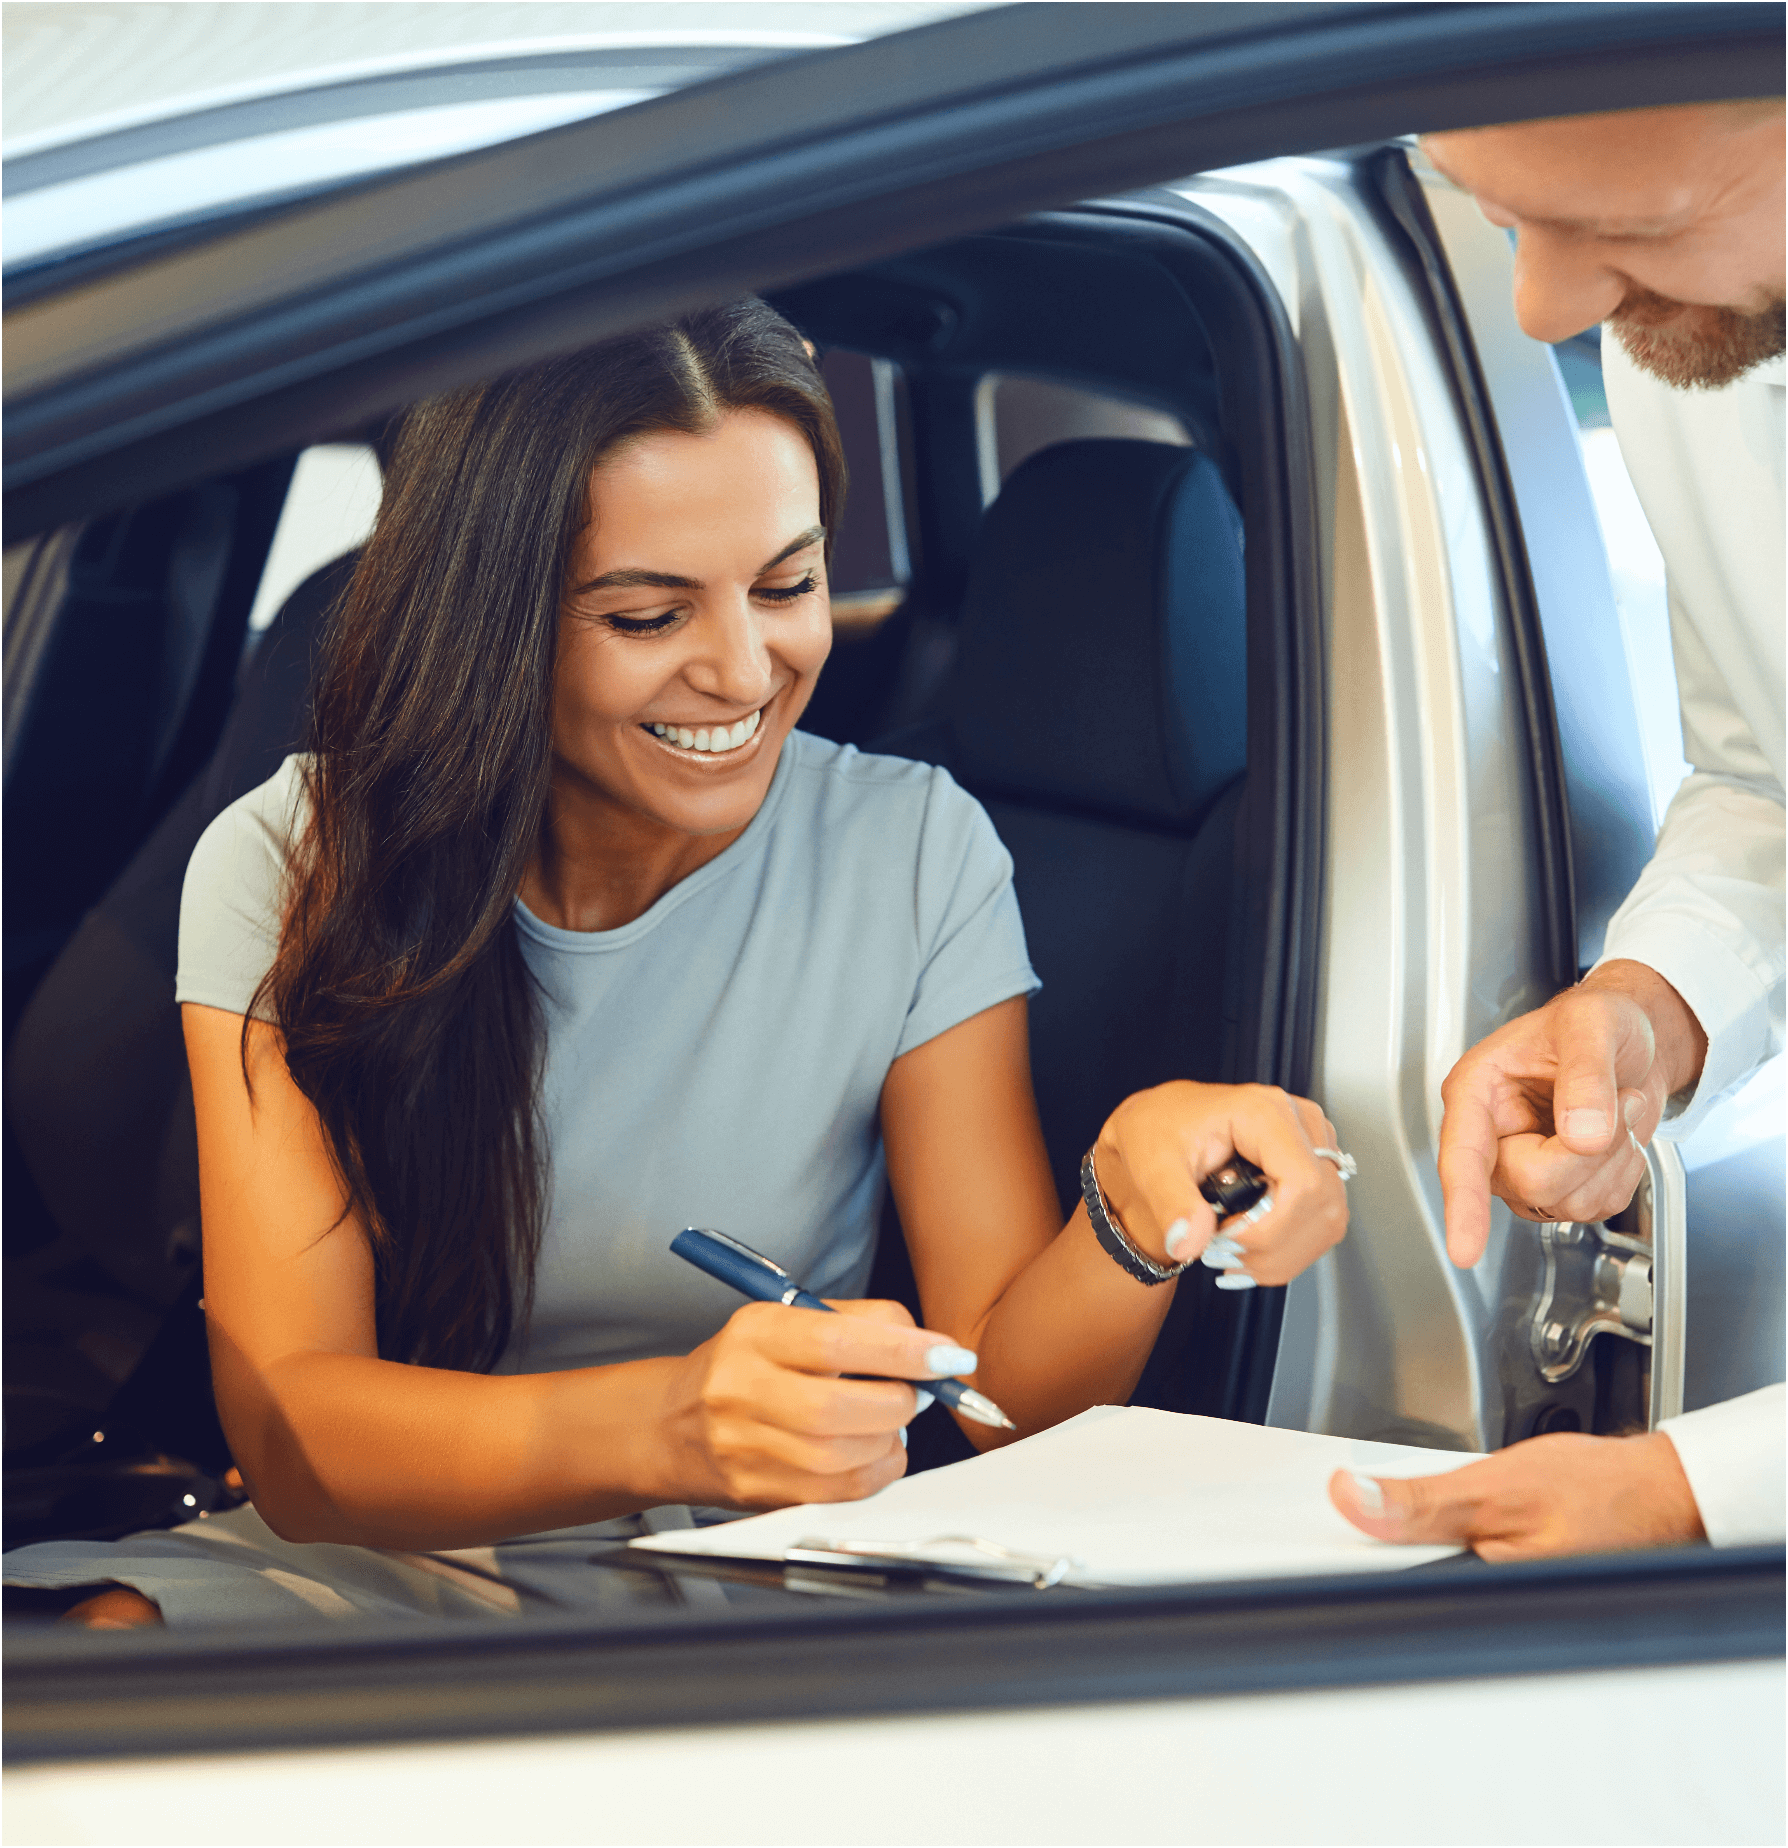 New Car Buyers Not Looking For Self-Driving Feature 09/16/2019